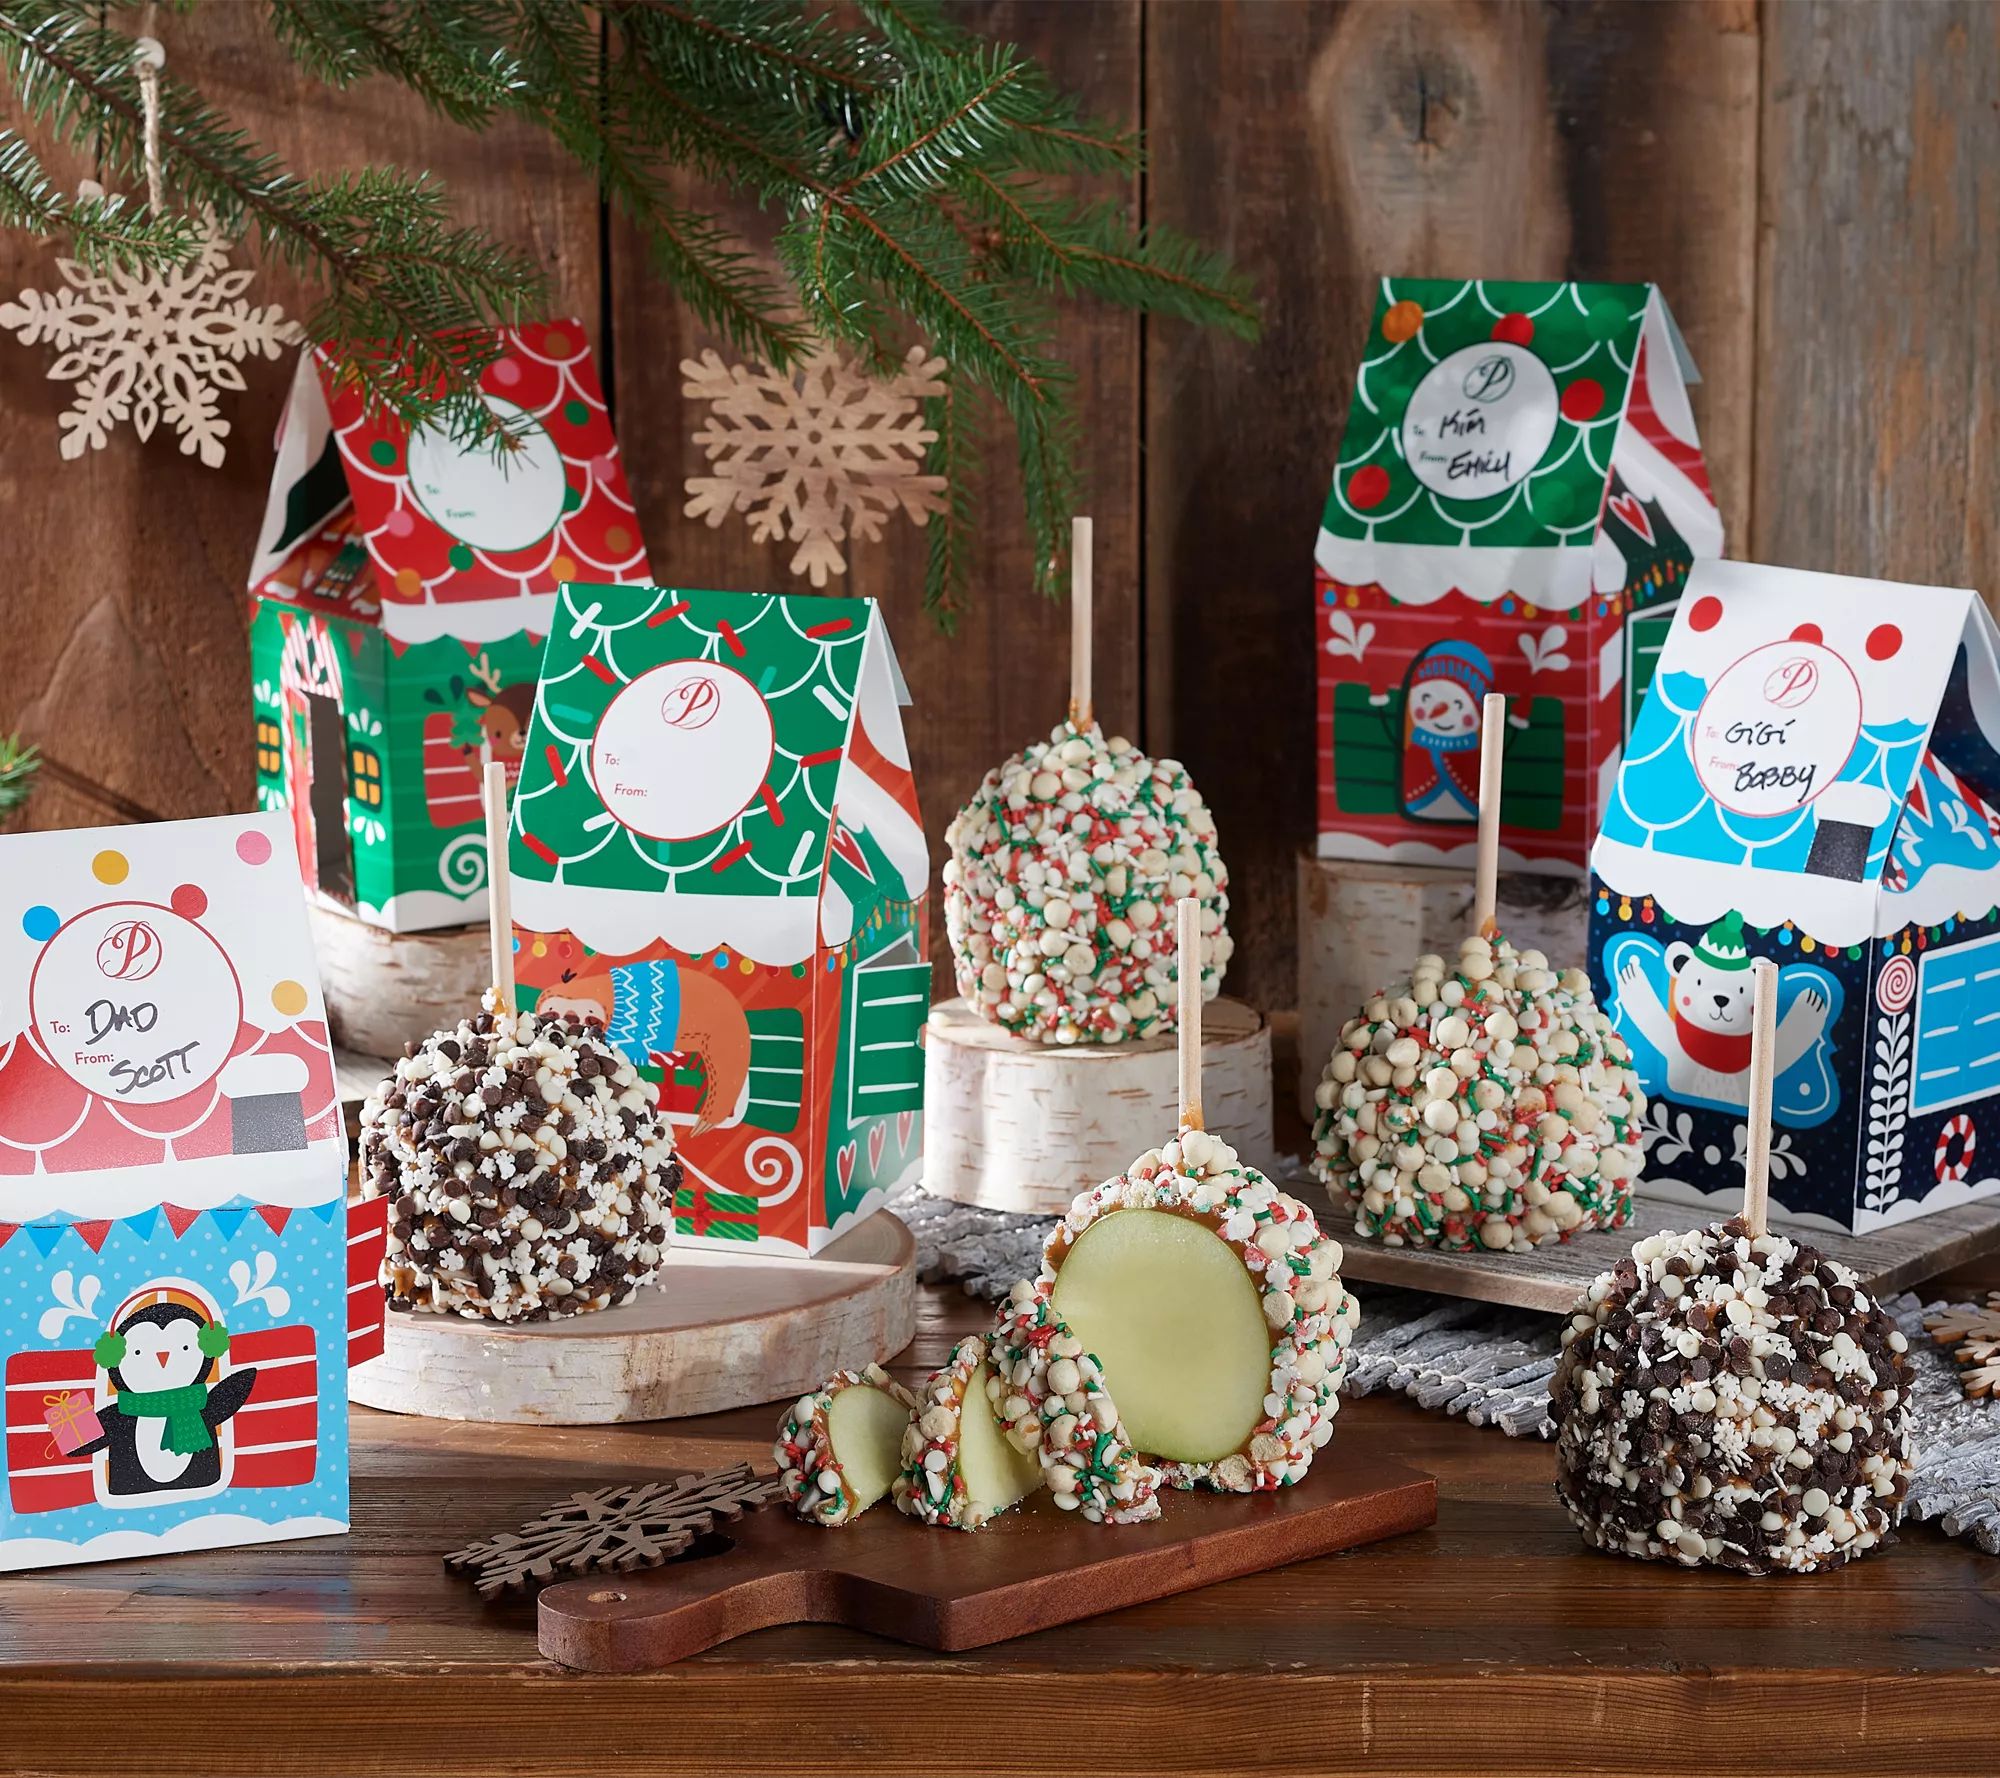 SH 11/28 Mrs. Prindables 10pc Large Holiday Caramel Apples w/ Gift Boxes | QVC